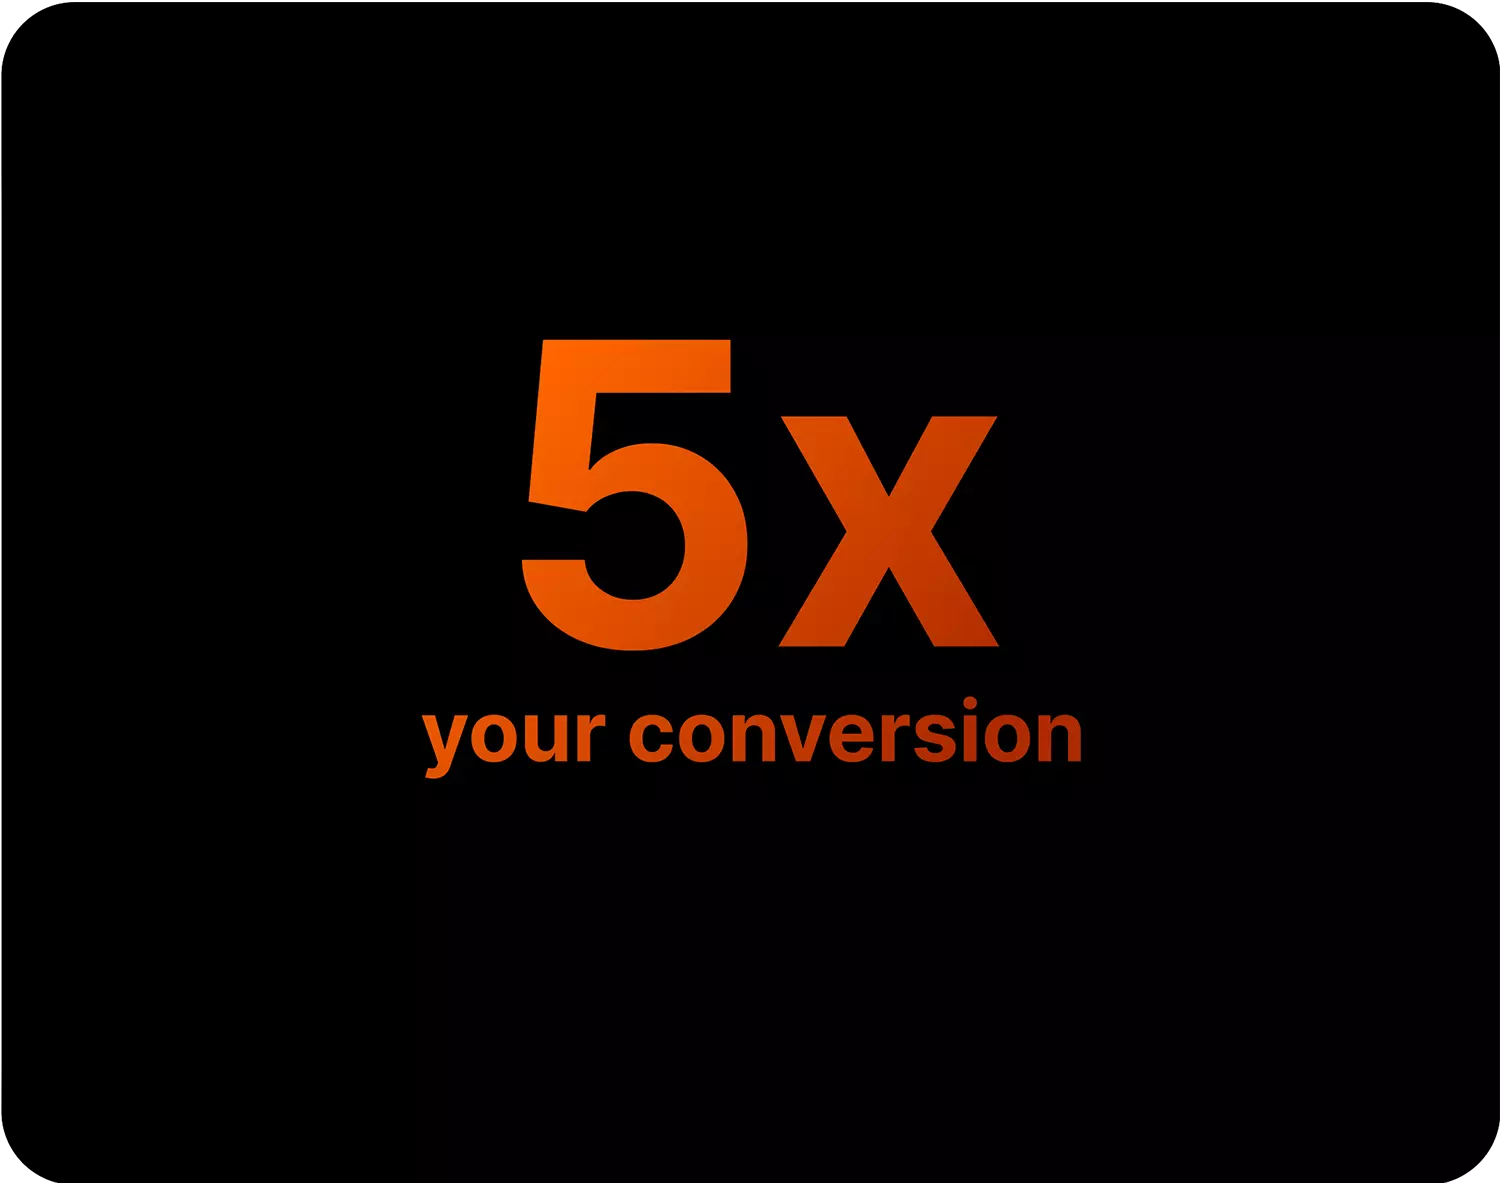 5X your conversion